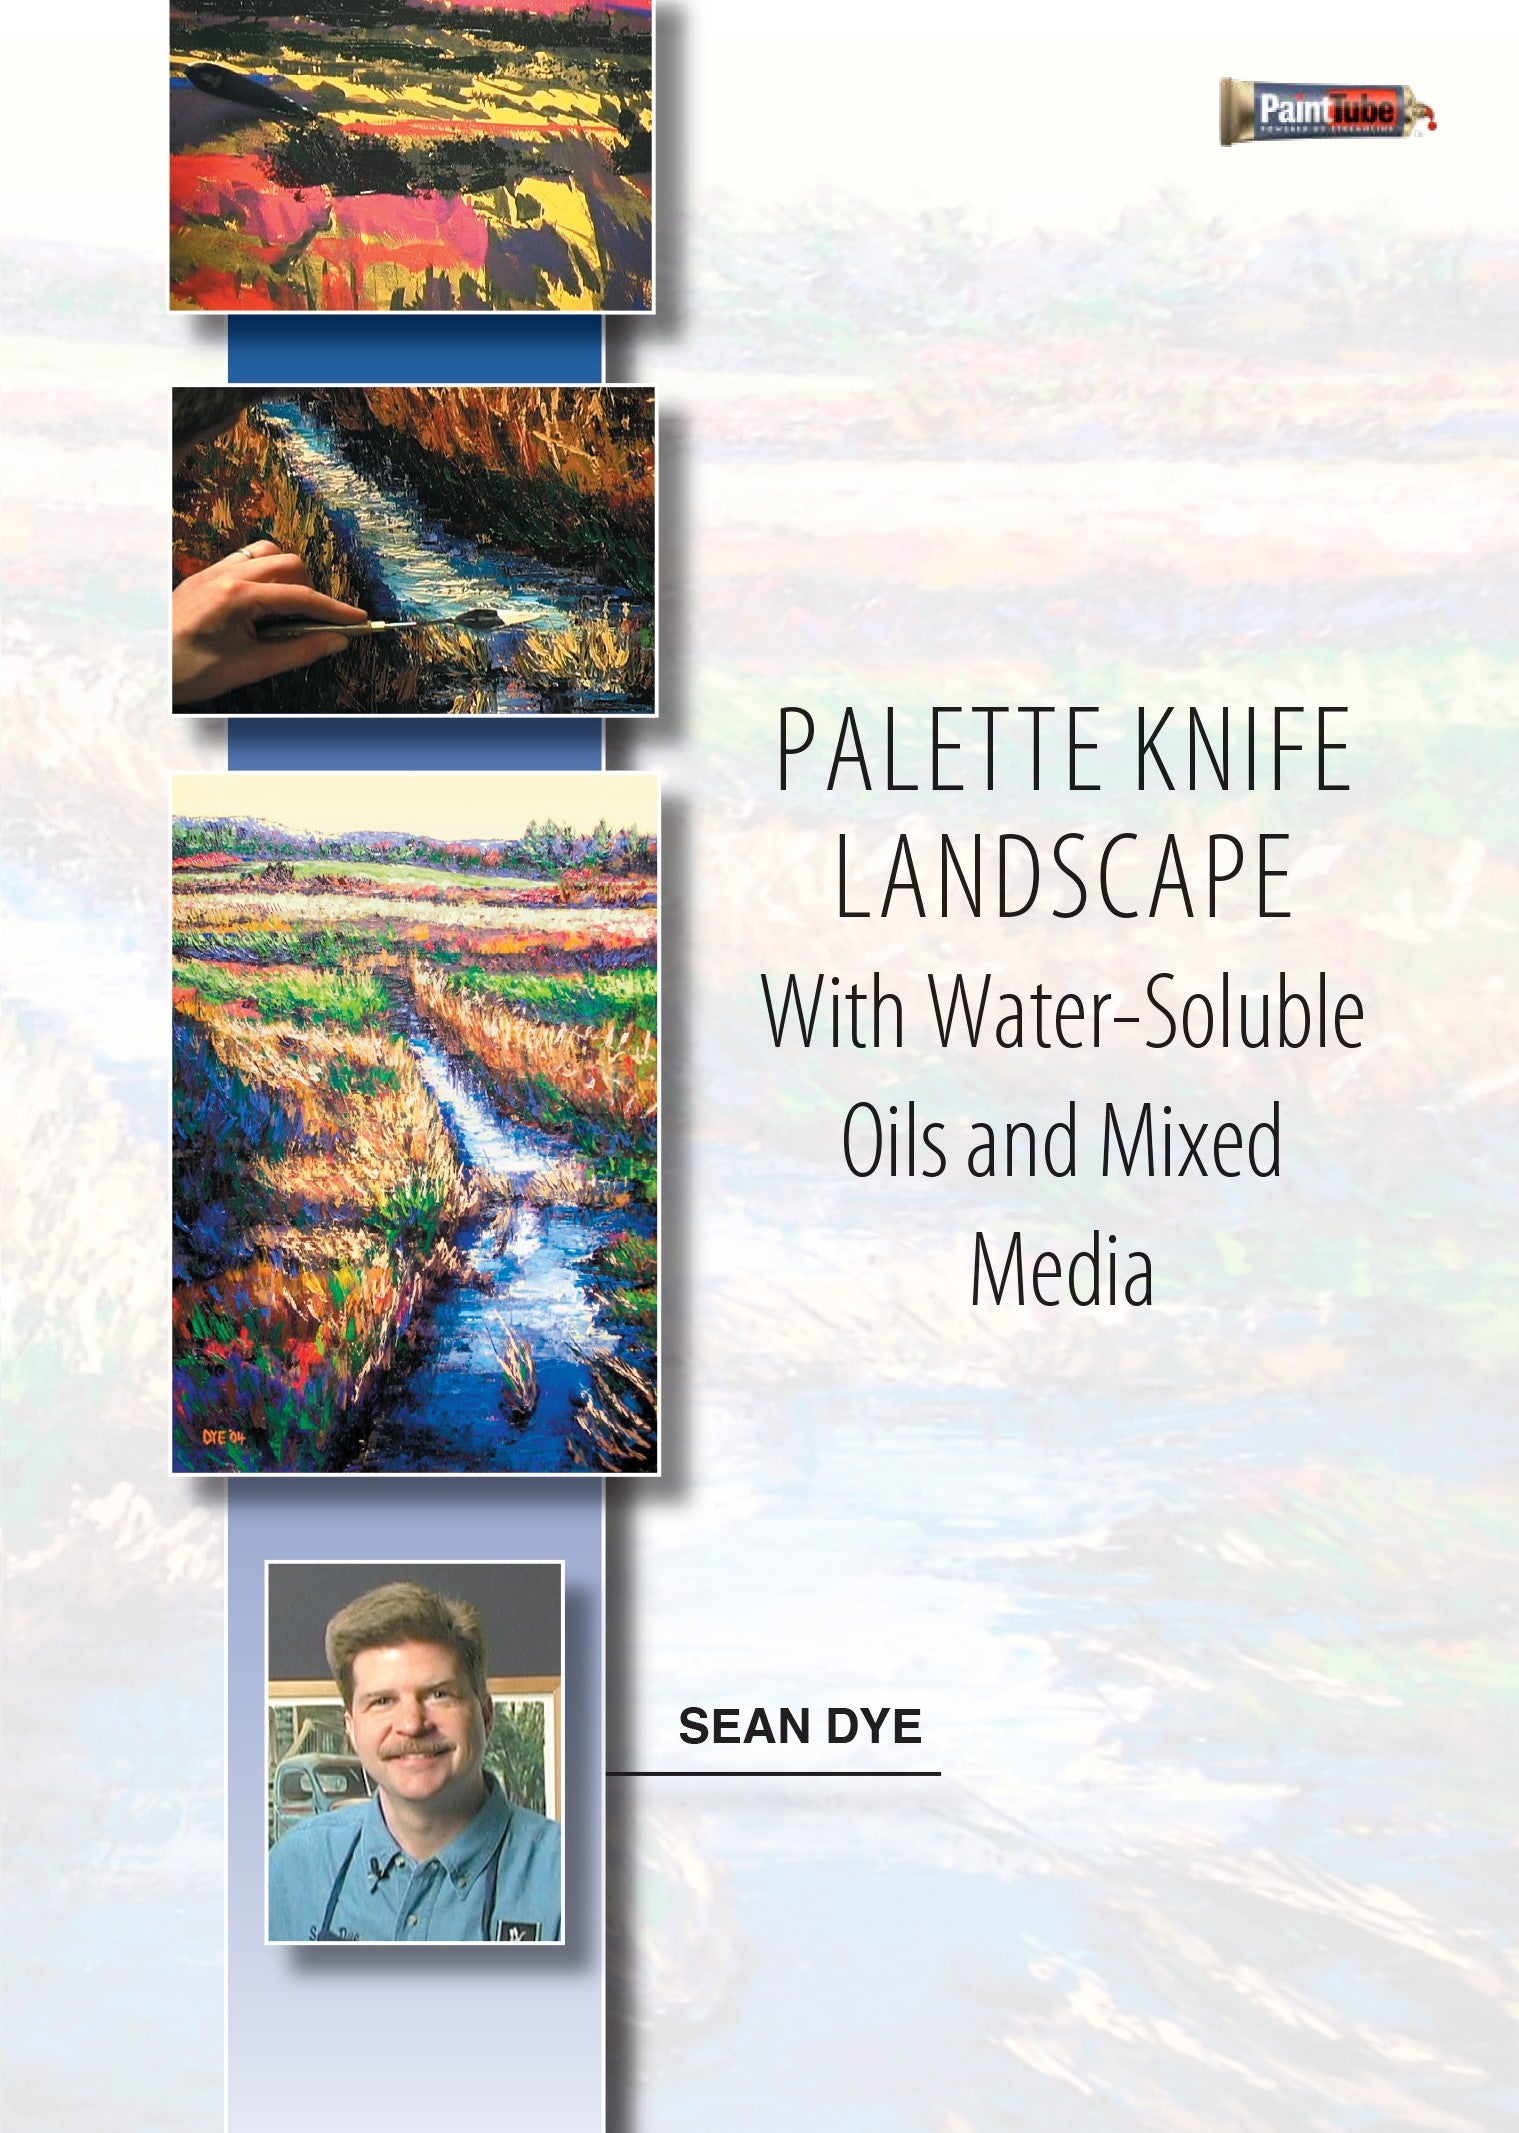 Sean Dye: Palette Knife Landscape with Water-Soluble Oils & Mixed Media